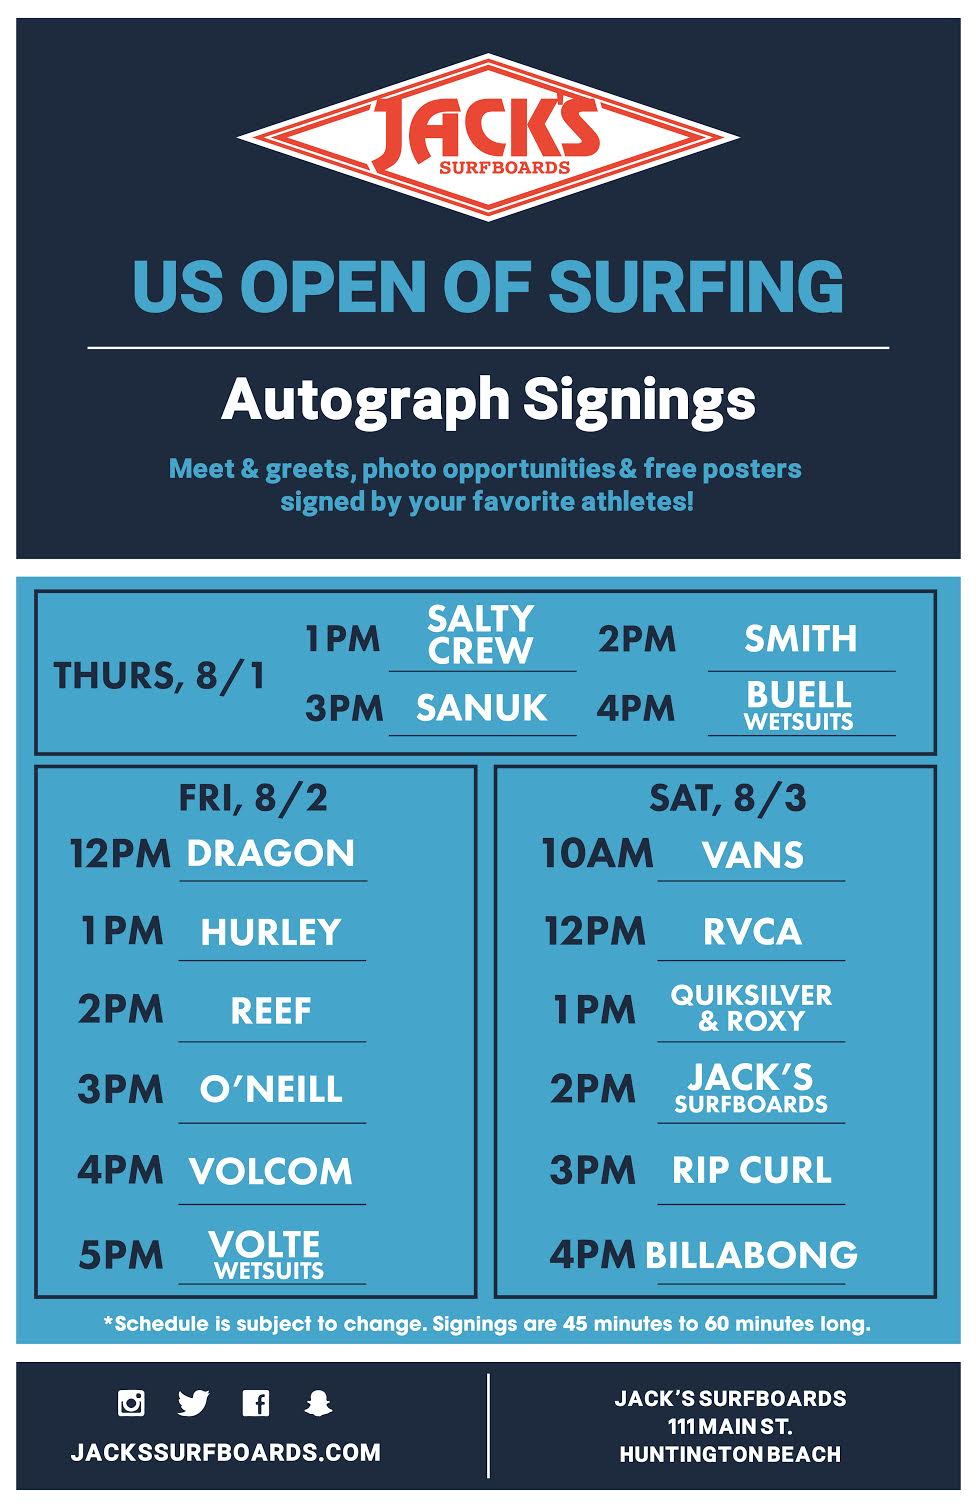 US OPEN OF SURFING - Autograph Signings 2019 | Jack's Surfboards